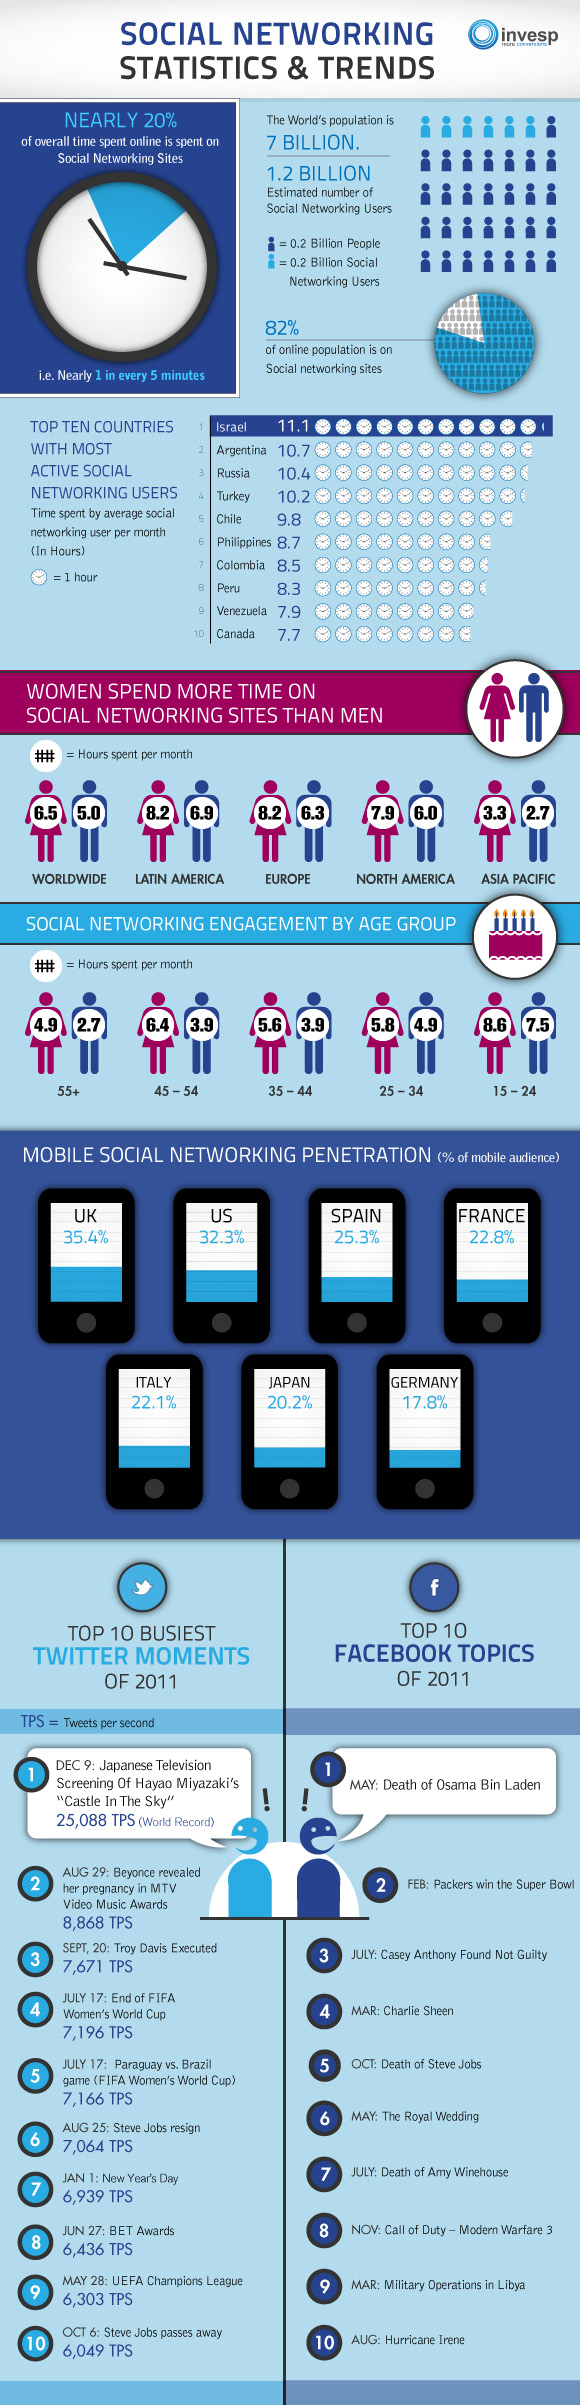 Social Networking Statistics and Trends